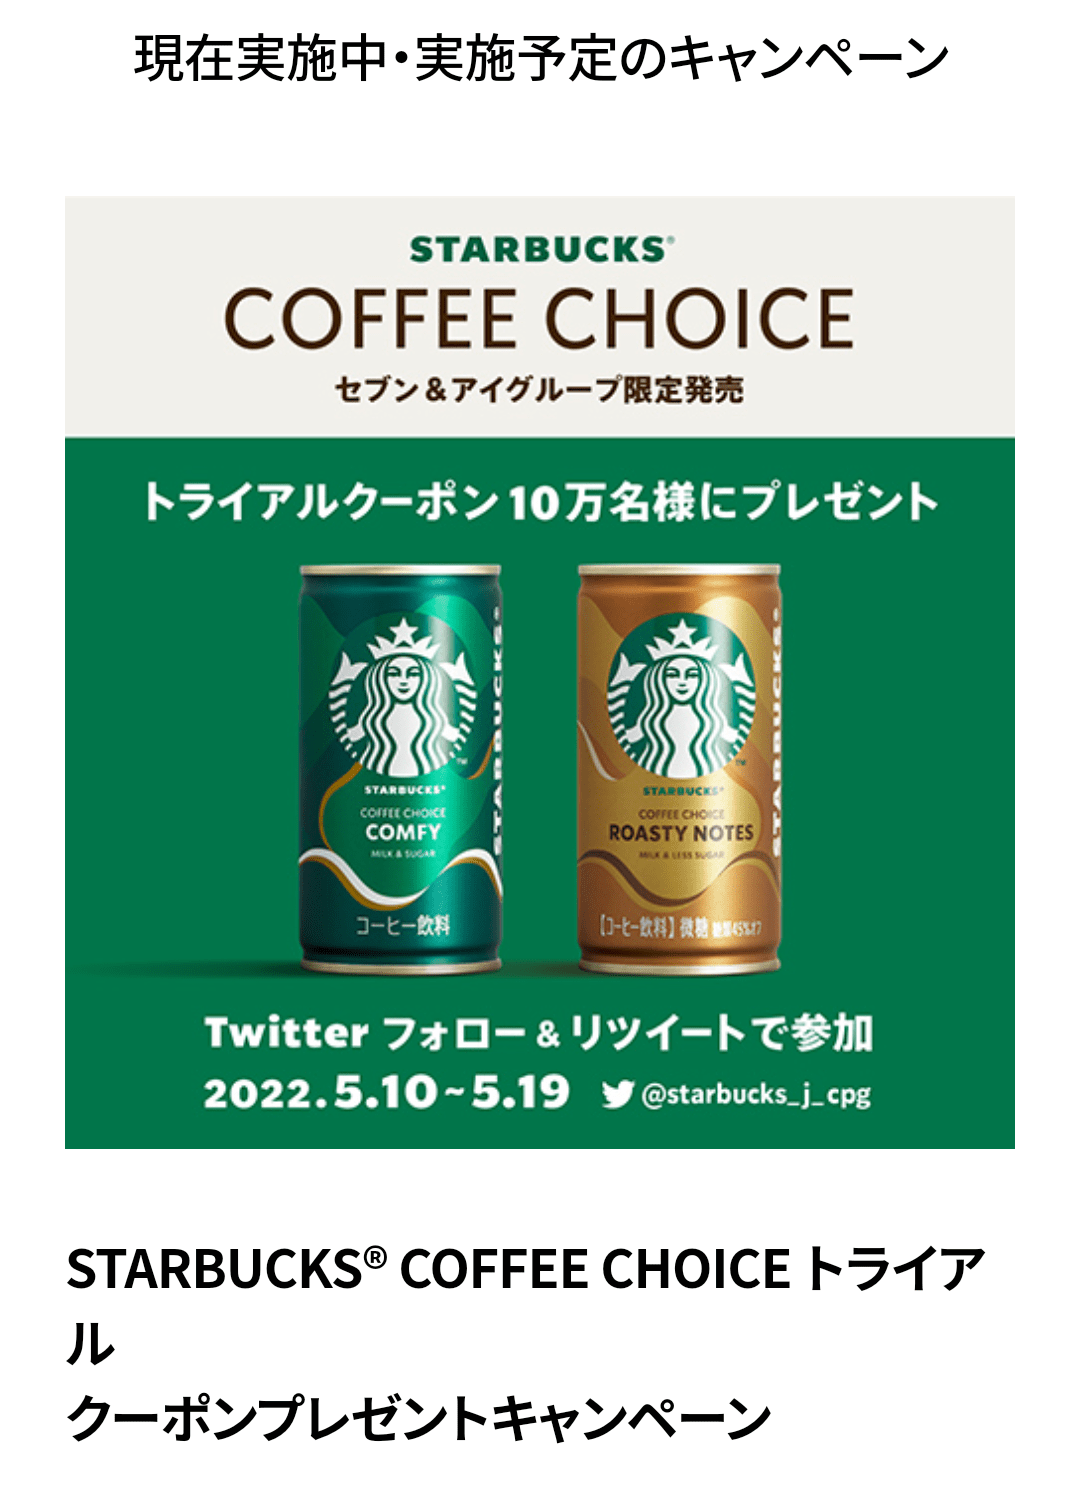 starbucks-coffee-choice-trial-coupon-present-campaign